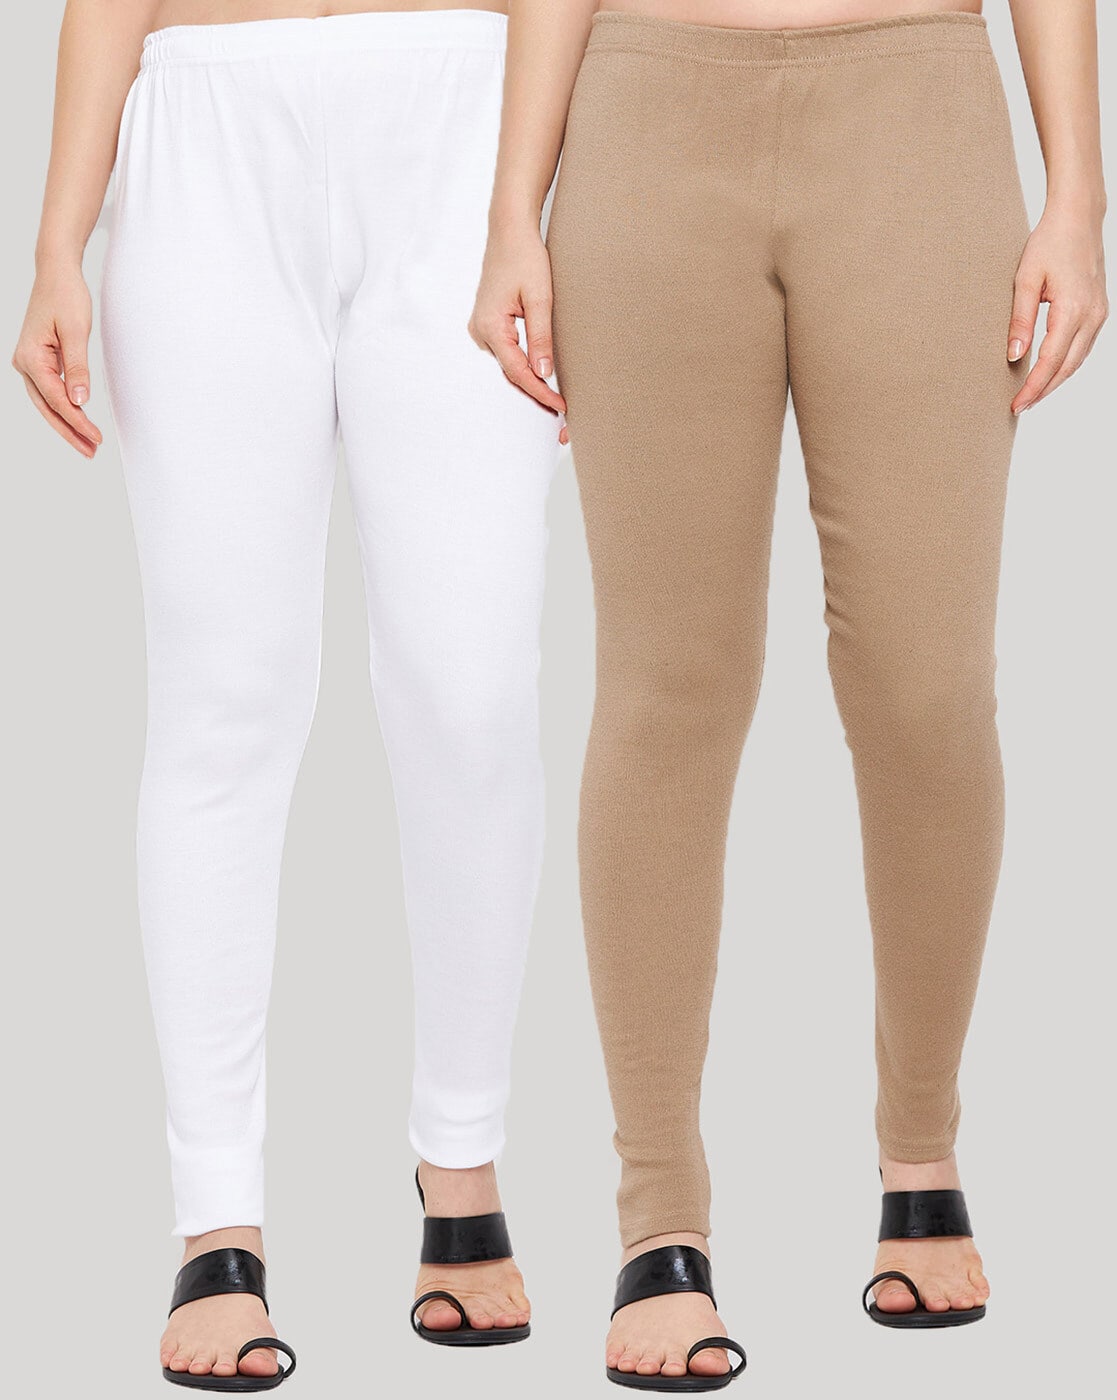 Women Clothing Brand - Buy Skivvy, Woolen Sweaters, Leggings, Pullover,  Track Pants, T Shirts, Sweatshirts, Shorts & Skivvy Tops for Women & Kids  Online in India